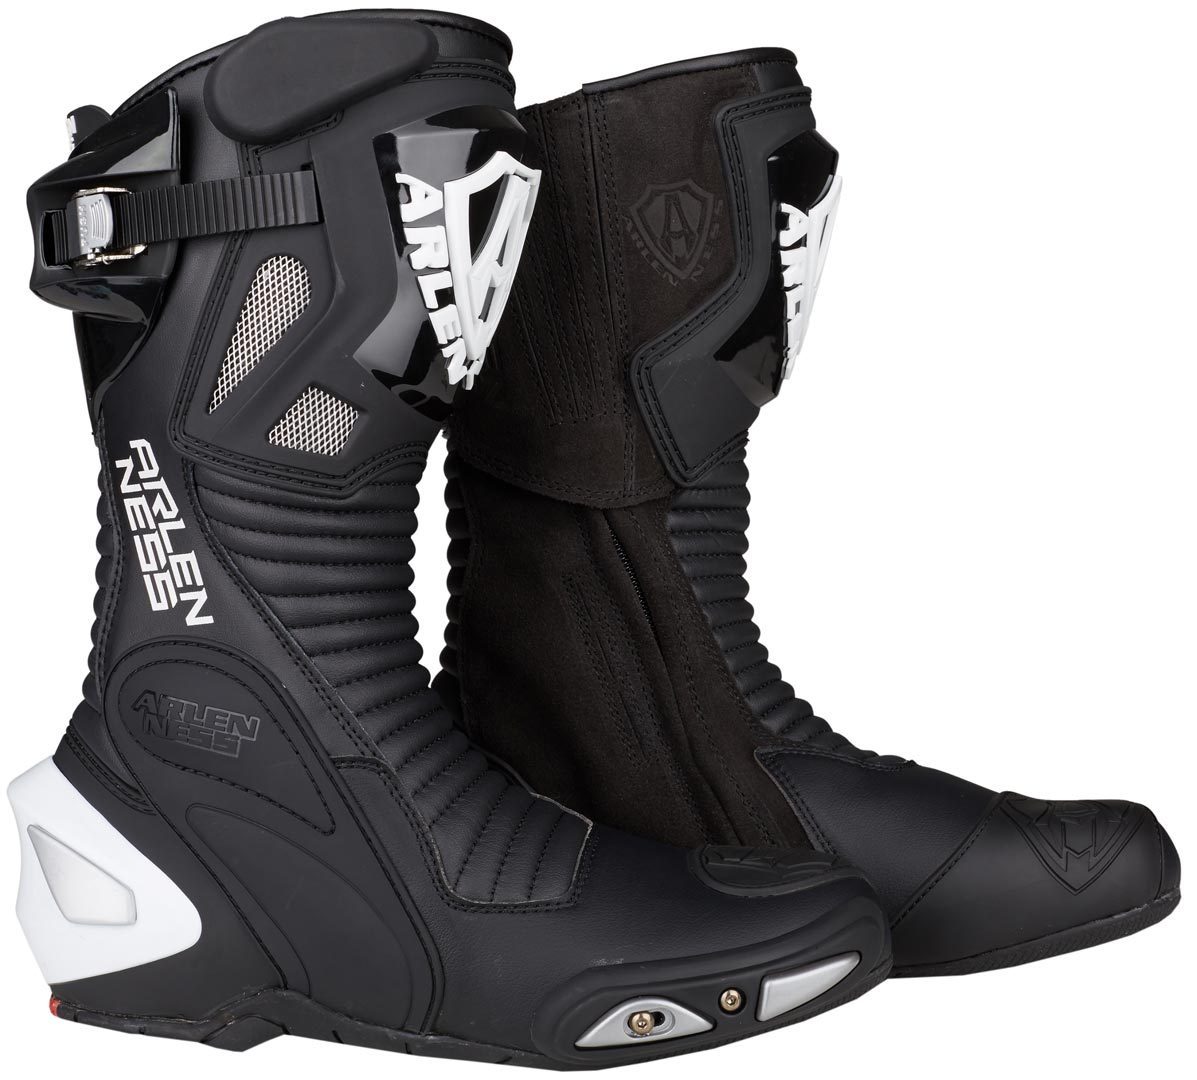 best motorcycle boots under 100